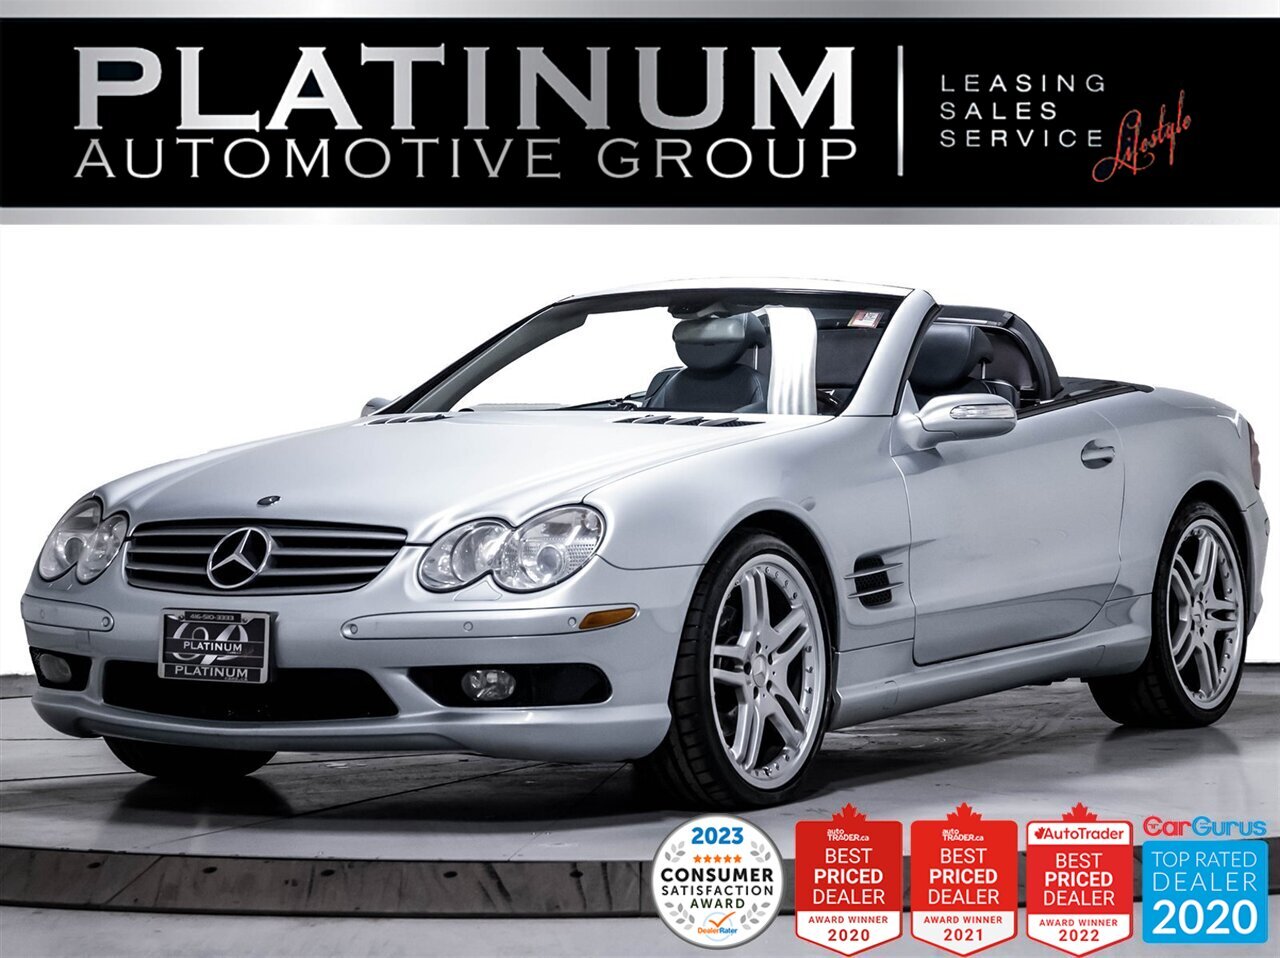 2004 Mercedes-Benz SL-Class SL500,V8,302HP,CONVERTIBLE,AMG STYLING,BOSE SYS